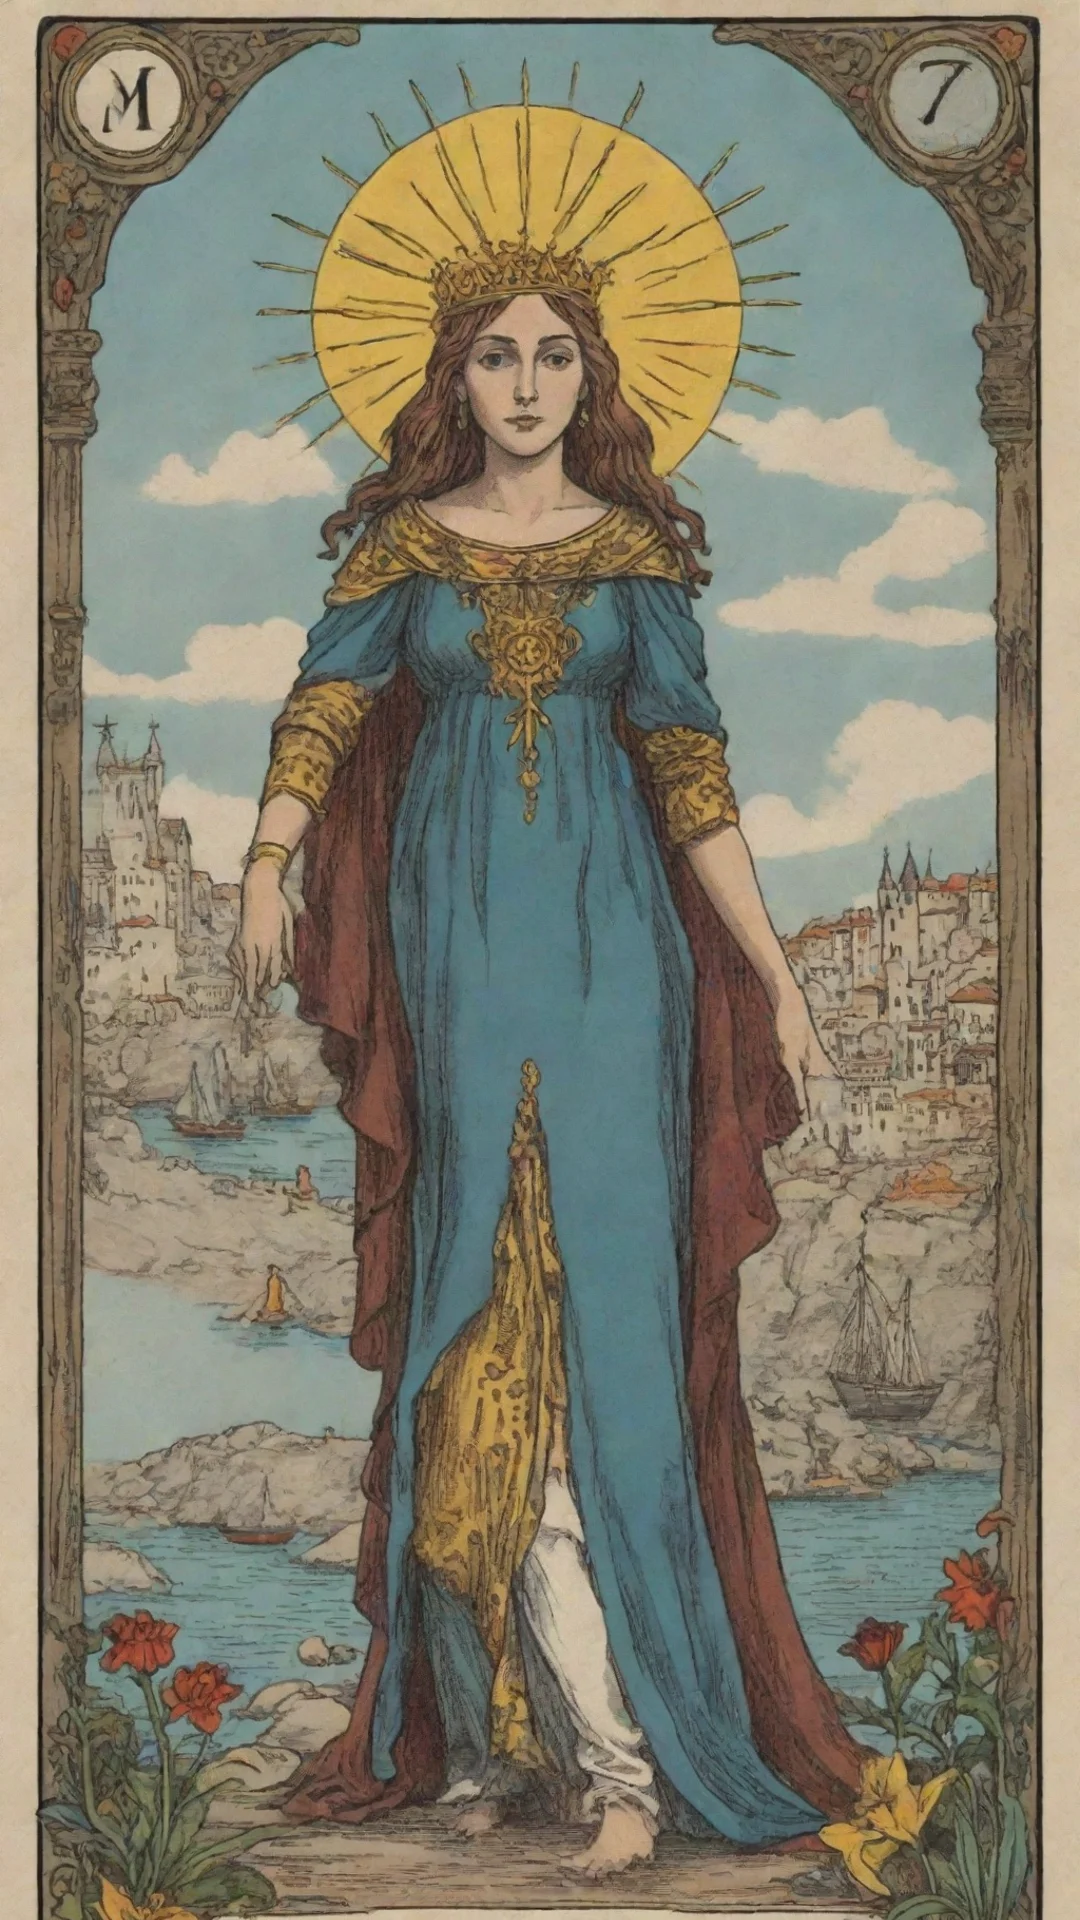 aiamazing generate a tarot card in the marseille style but original as an illustration awesome portrait 2 tall